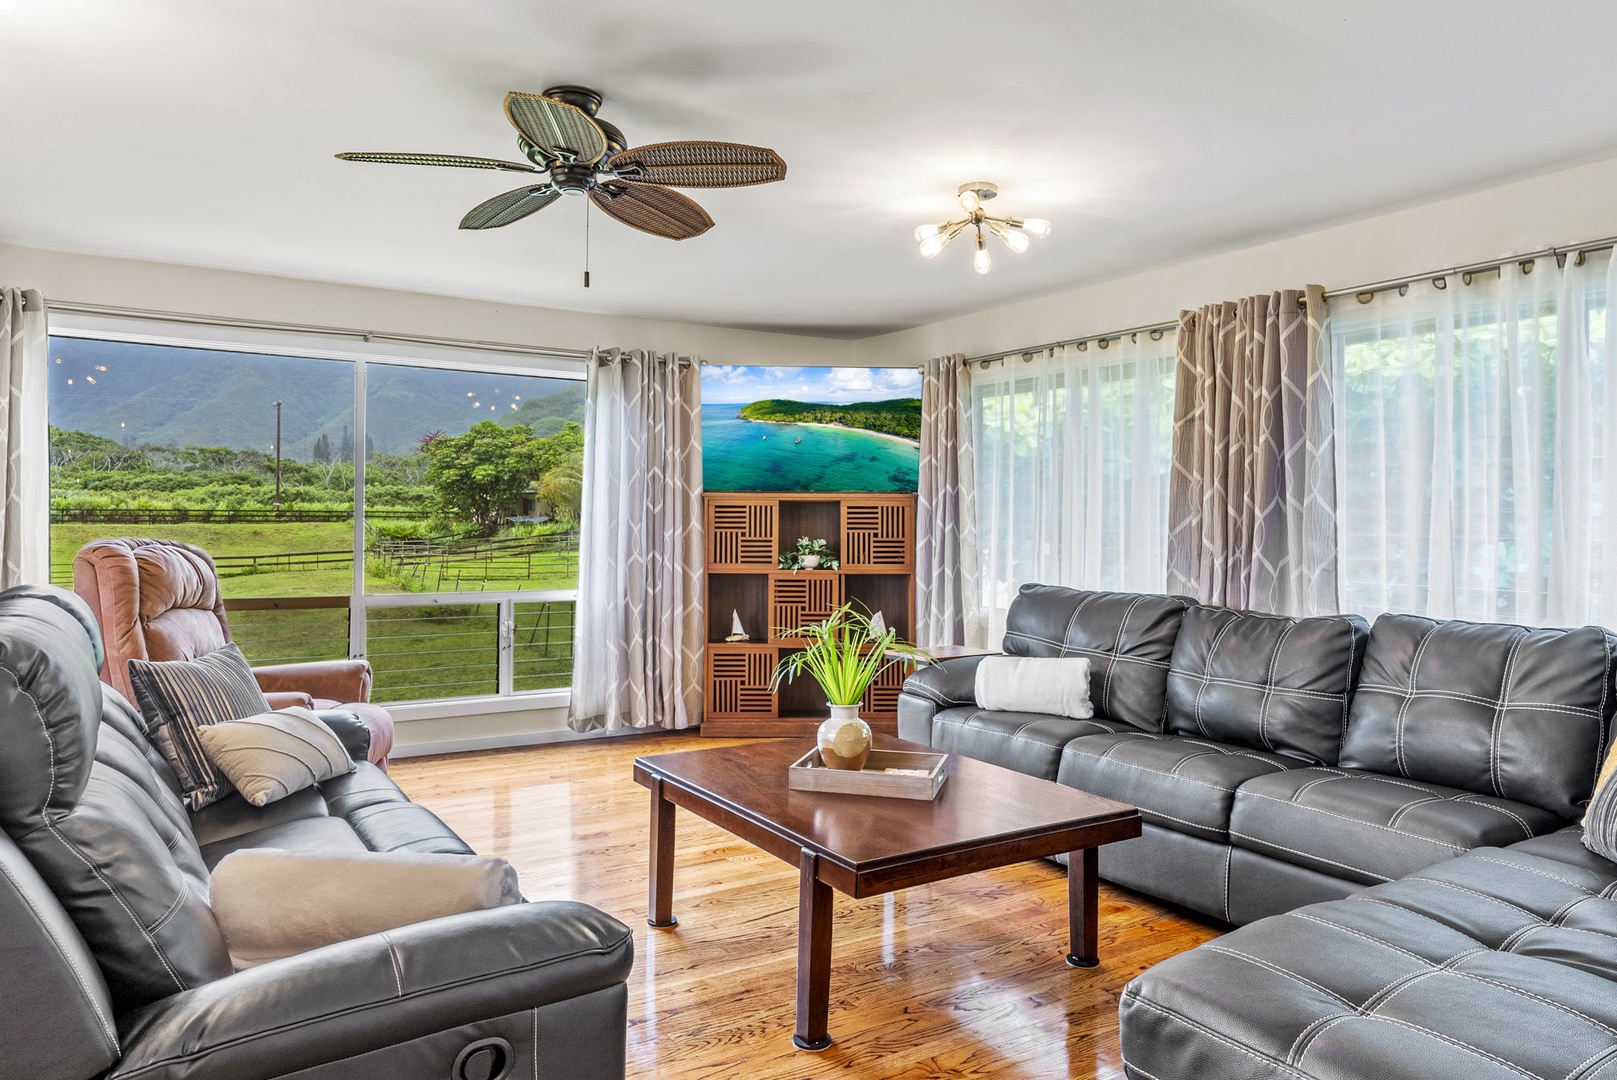 Hauula Vacation Rentals, Mau Loa Hale - Comfortable seating for your whole group, and expansive windows